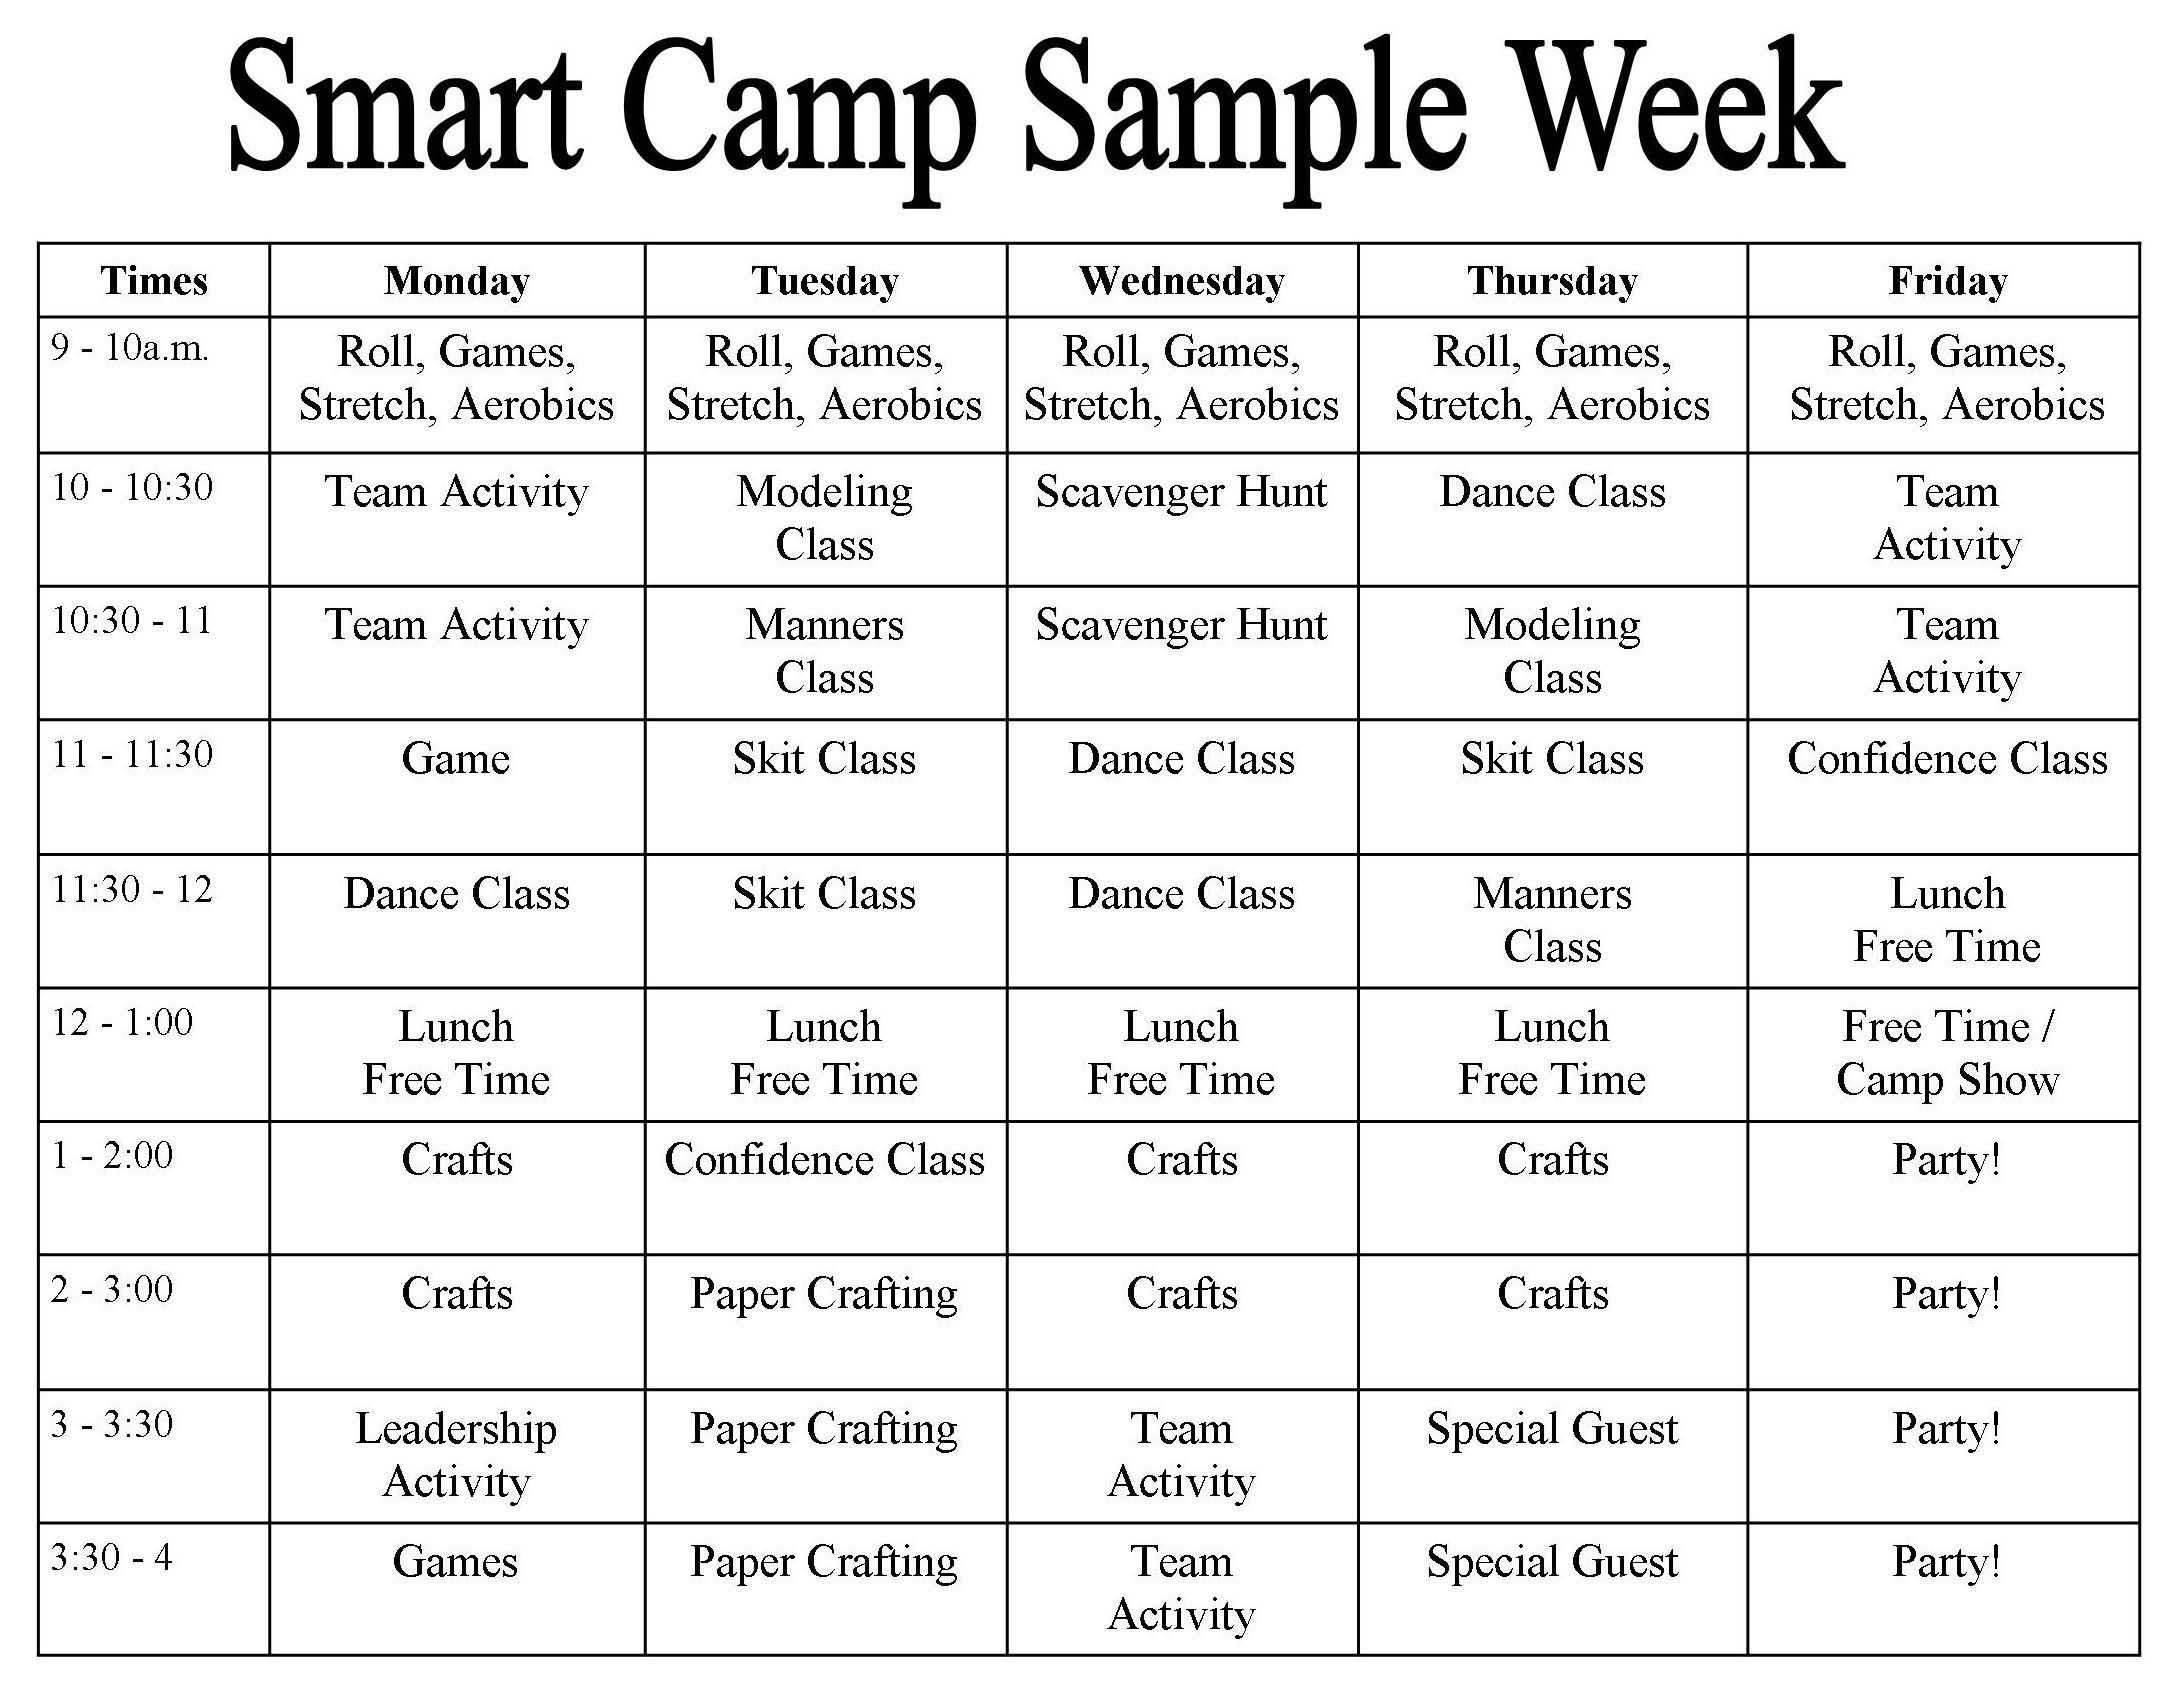 Smart Camp Weekly Sample Classes Grid | Summer Camp inside Camp Schedule Template